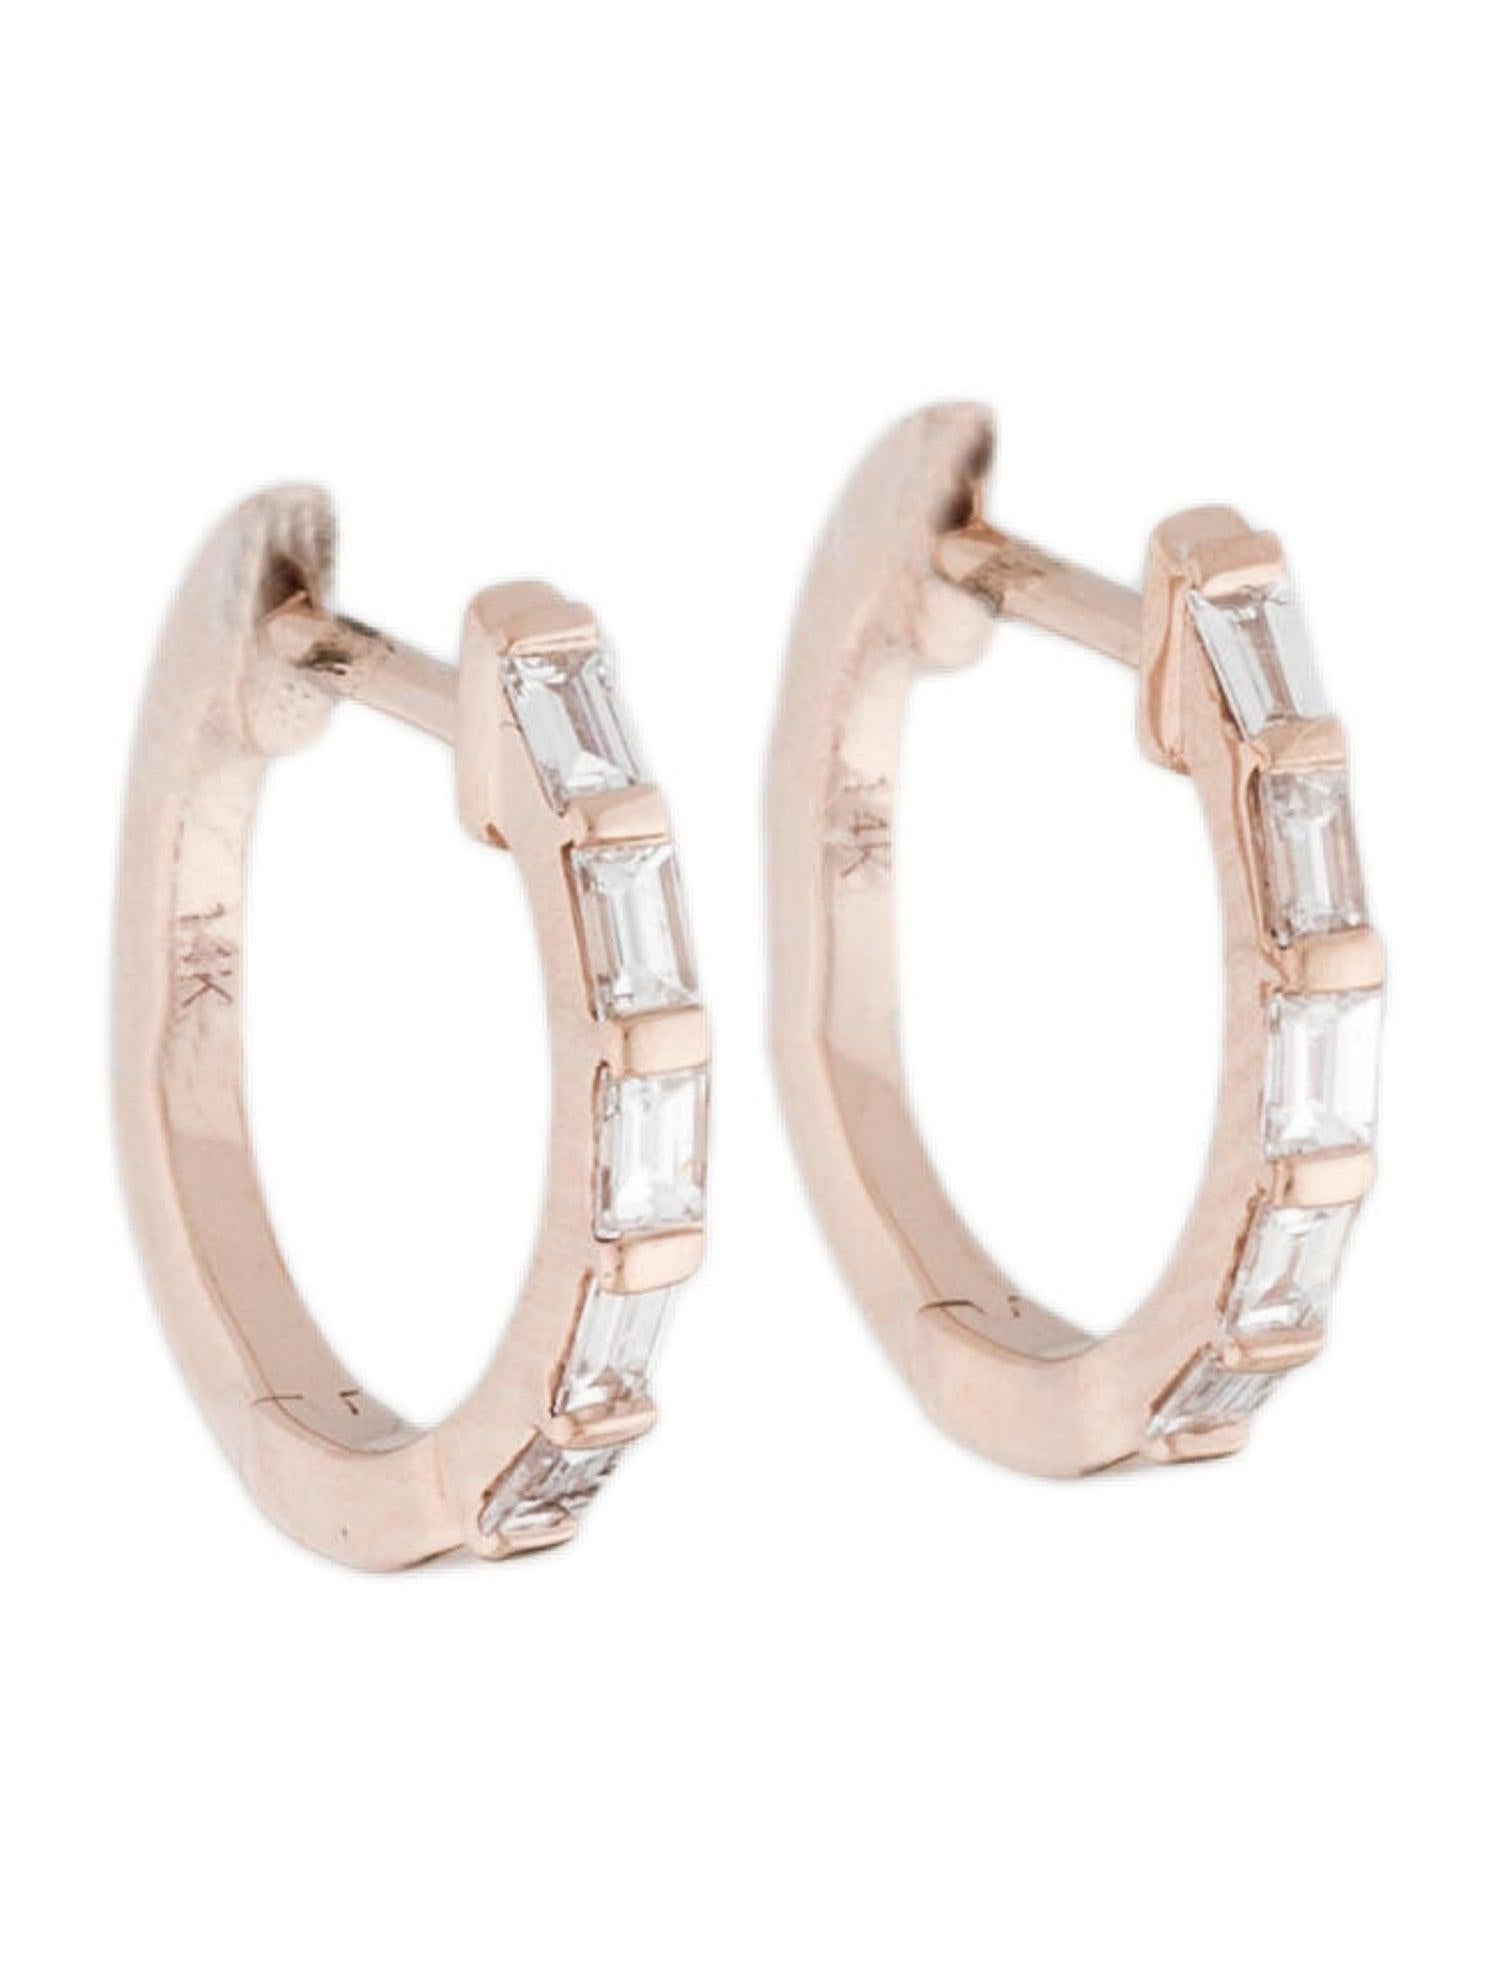 This pair of Diamond Baguette Huggie Hoop Earrings are sure to be your new favorite. With shimmering 0.25 ct. of baguette-cut diamonds adorning the Huggie, they create the perfect amount of sparkle for  any look. Crafted in 14k Rose Gold with easy